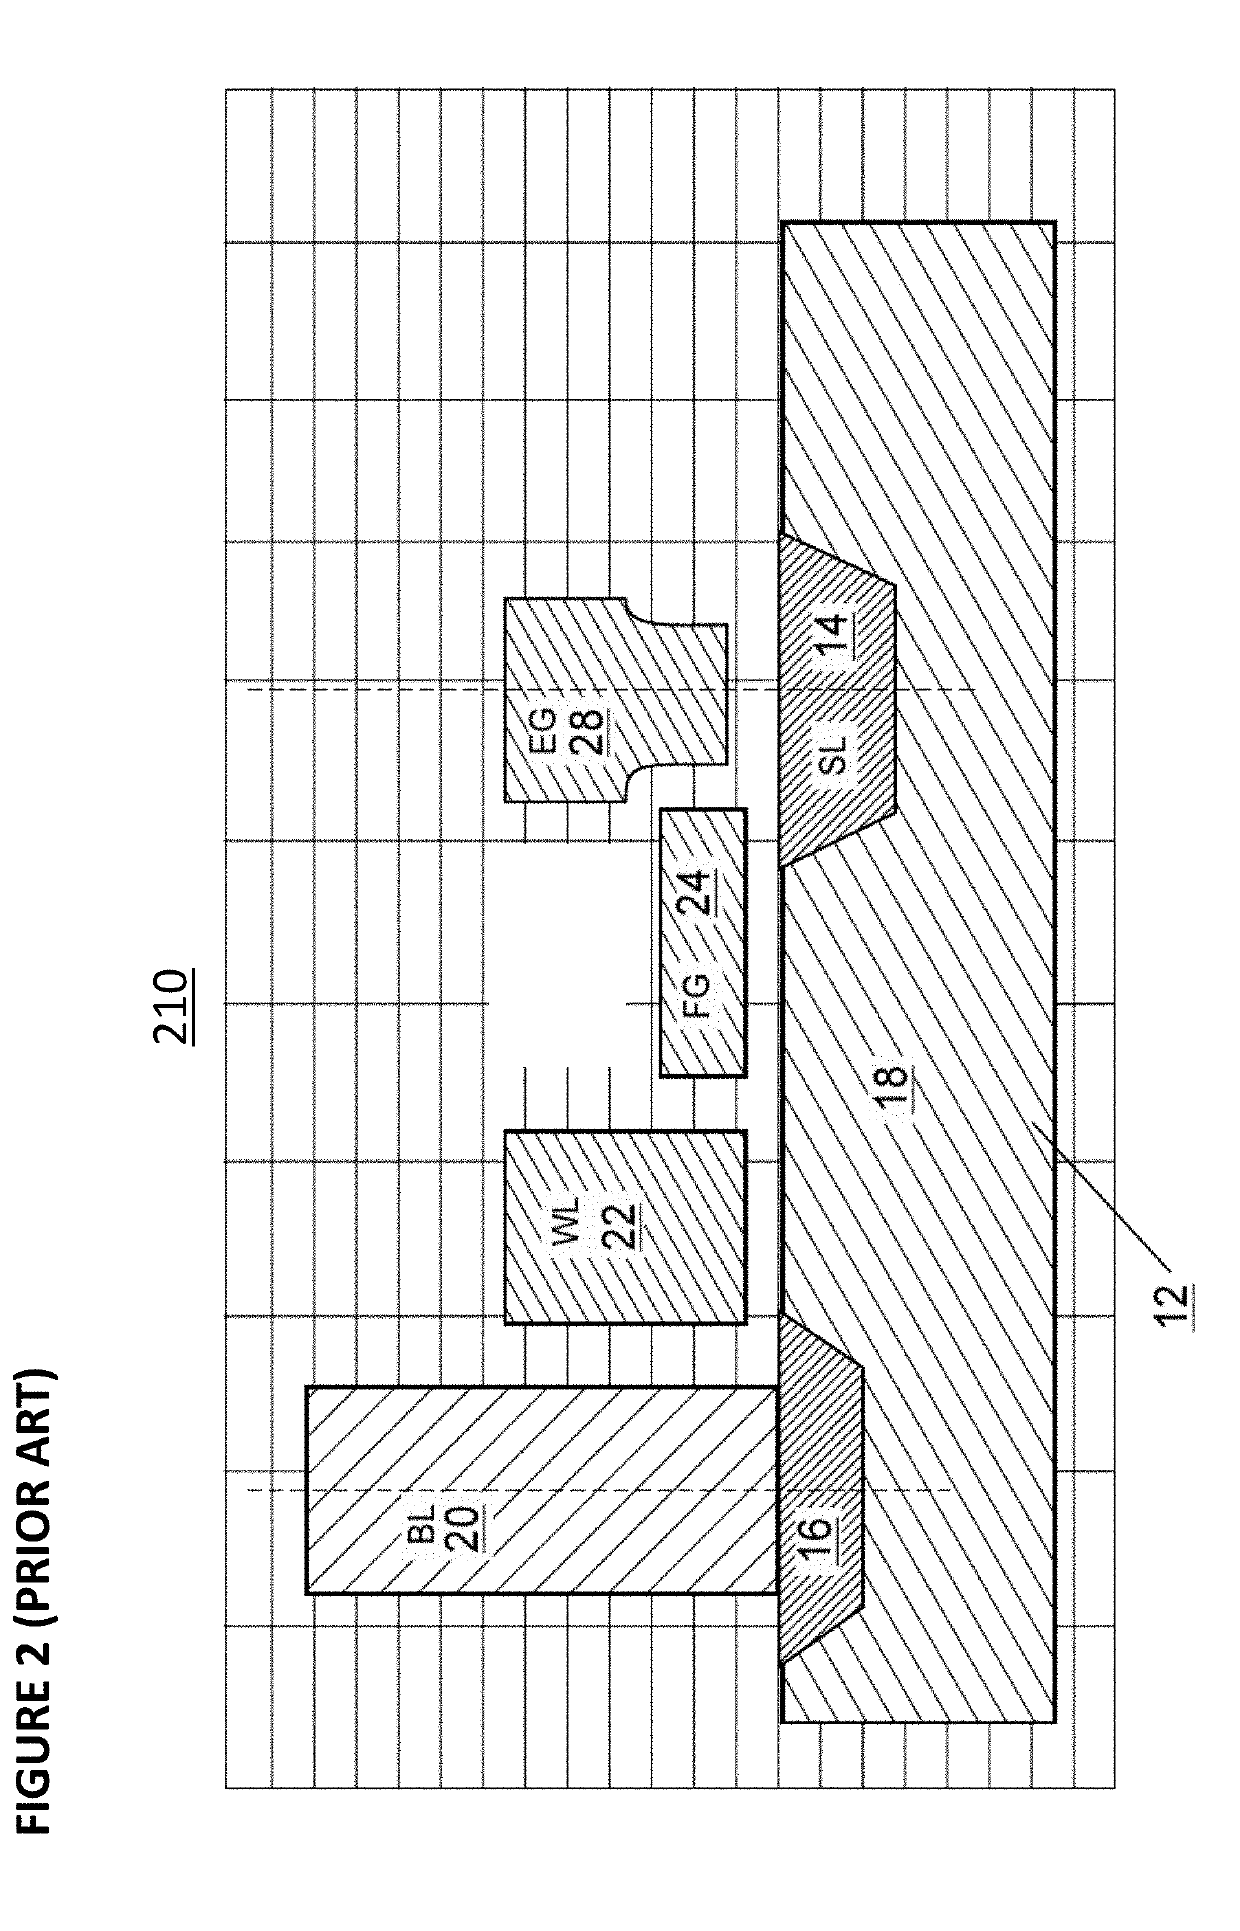 Anti-hacking mechanisms for flash memory device